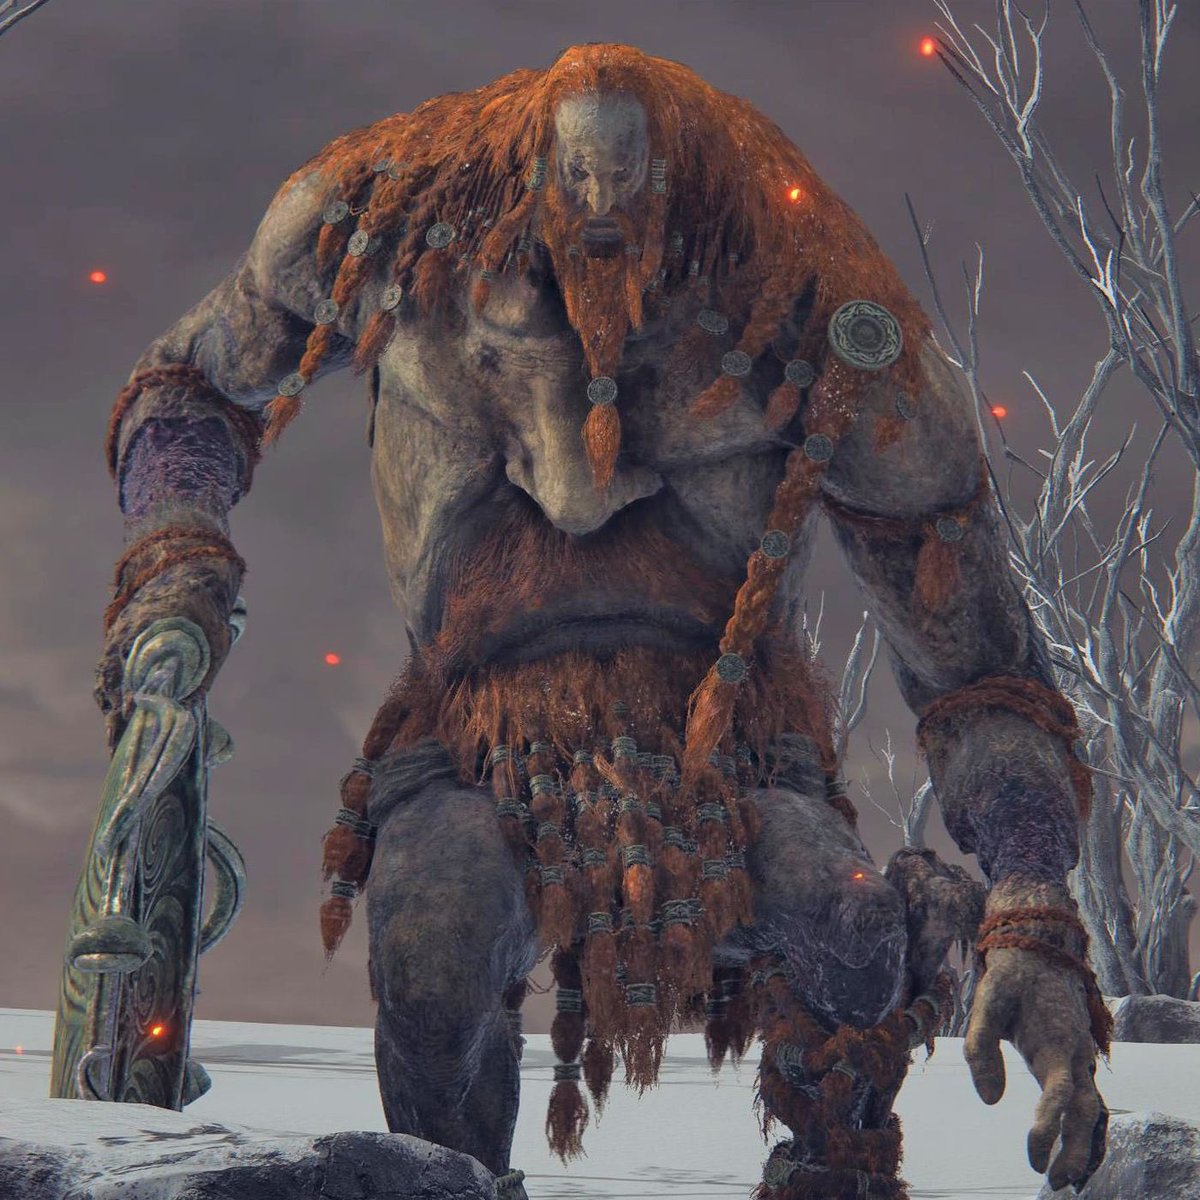 Everyone keeps saying Fire Giant is a hard boss but I beat him first try on both playthroughs I’ve done https://t.co/Zgk3jbD8RO https://t.co/CcOb5Ze2D5